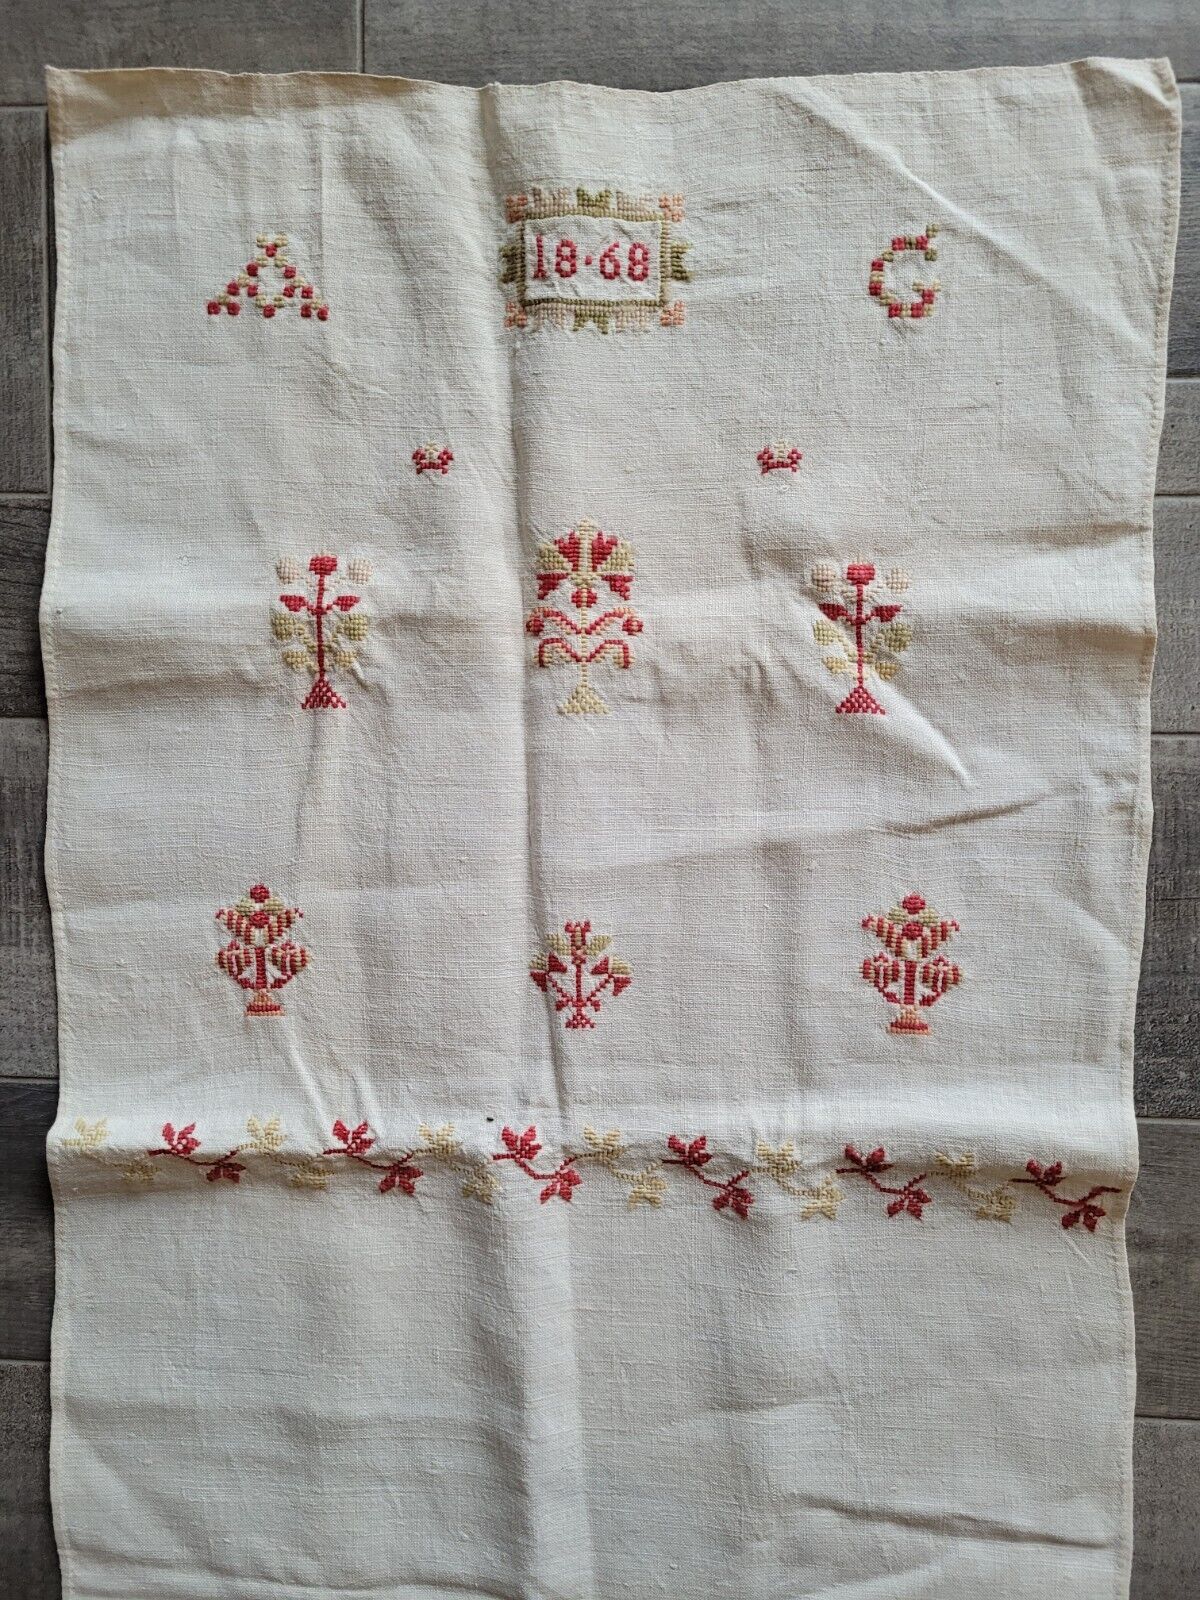 1868 Antique Linen Embroidered Show Towel With Lace